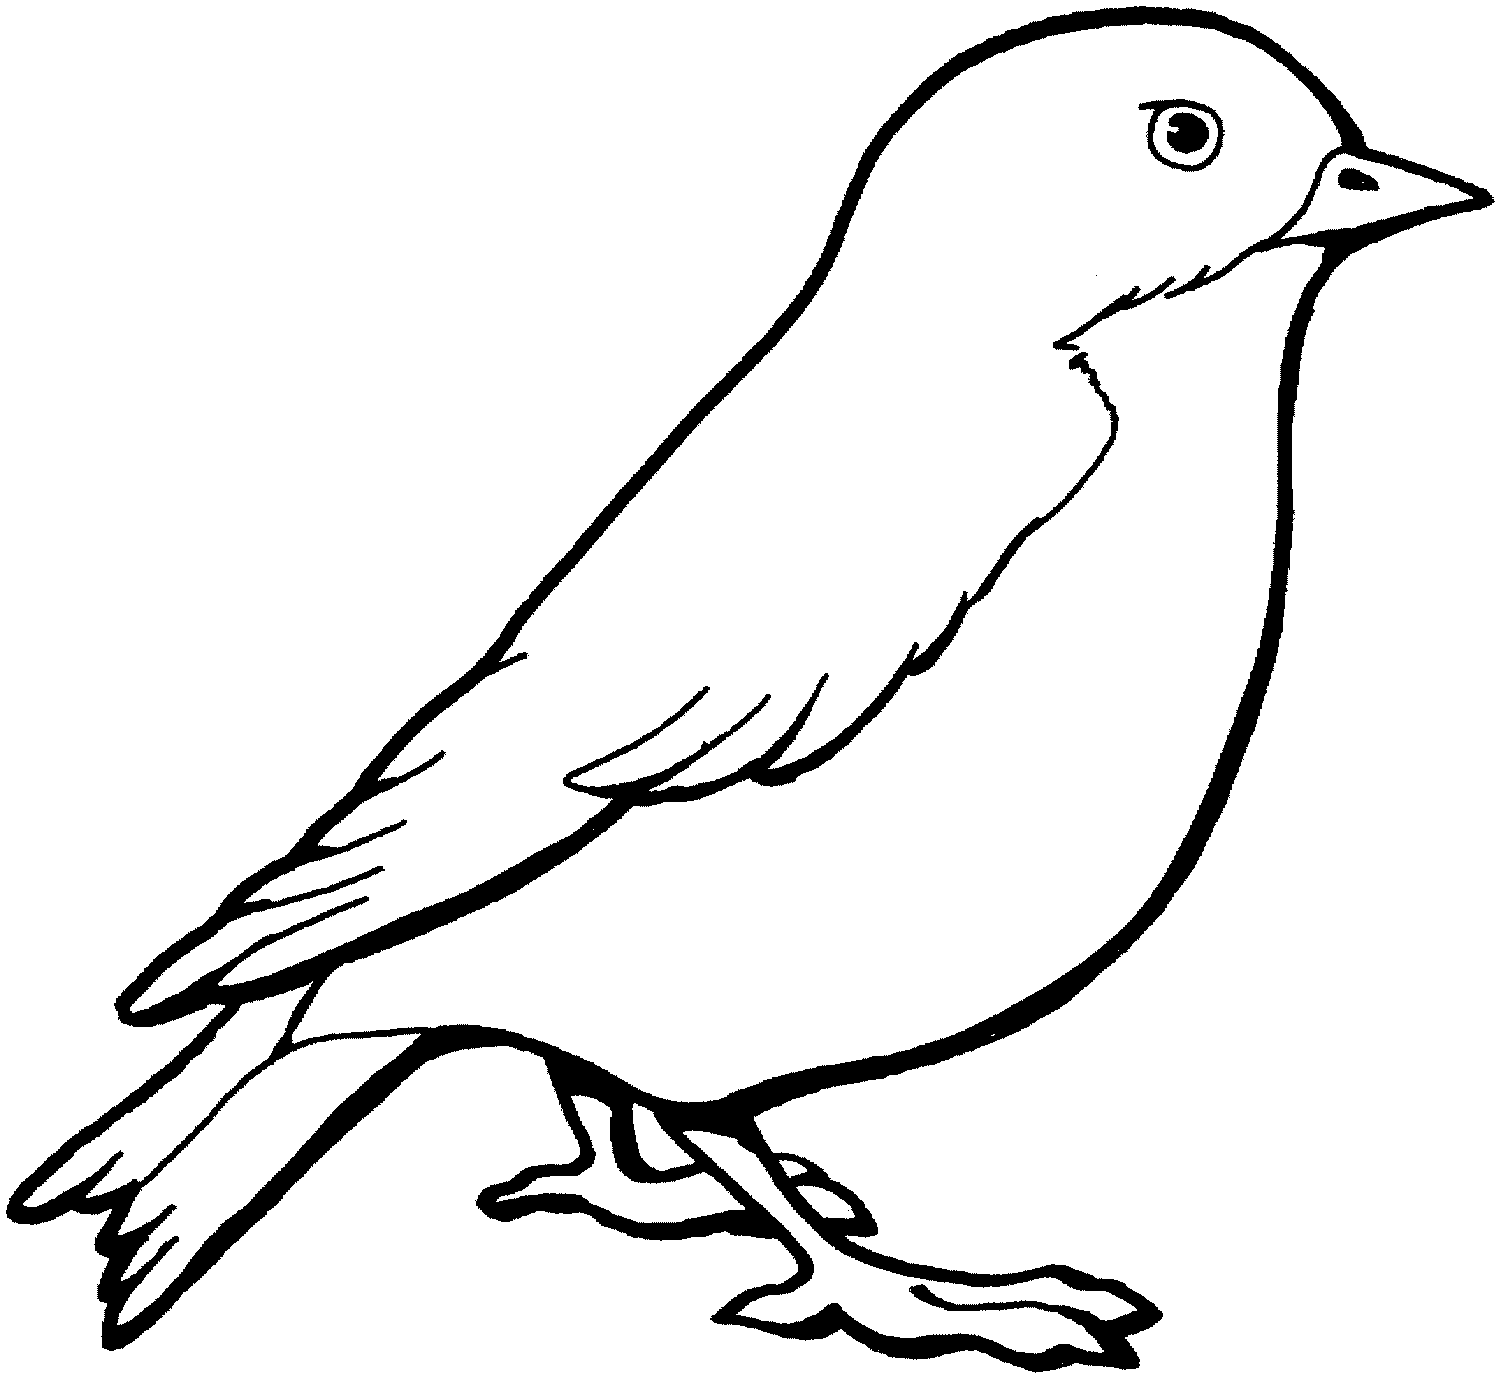 images of birds for colouring birds to download birds kids coloring pages images colouring birds for of 